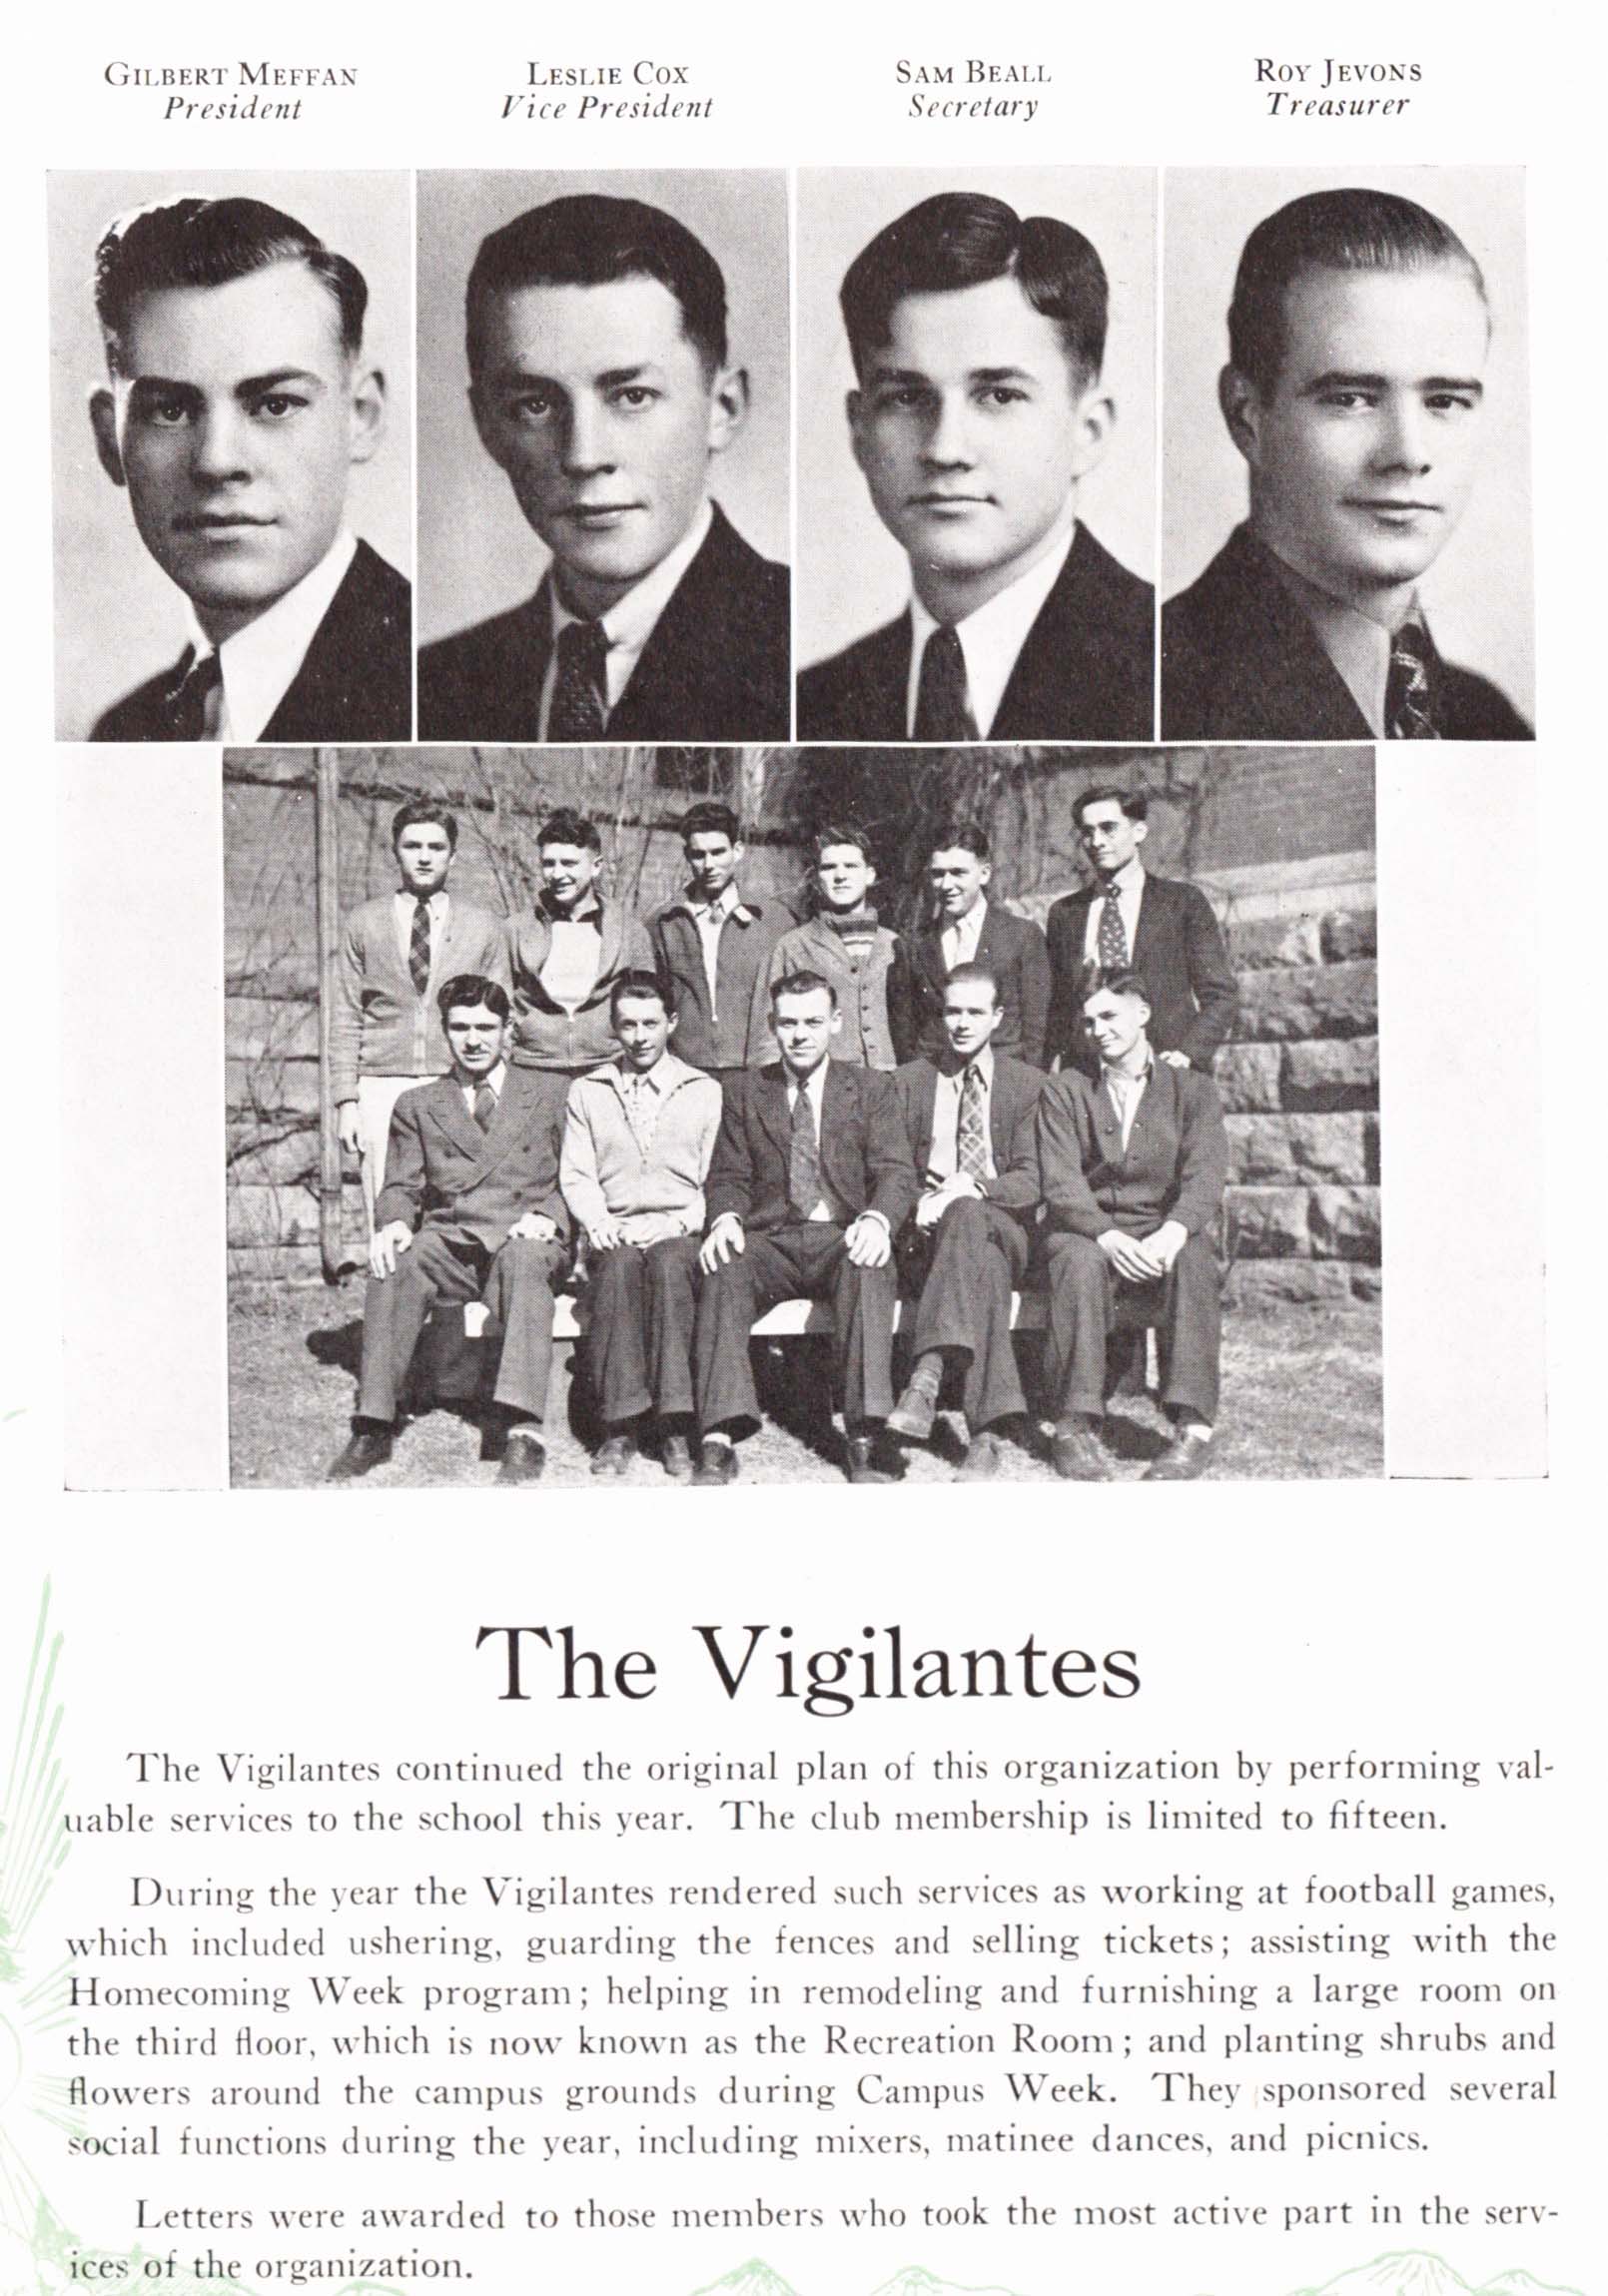 Group photo and four individual portraits depicting members of the Vigilantes club for the 1937 yearbook